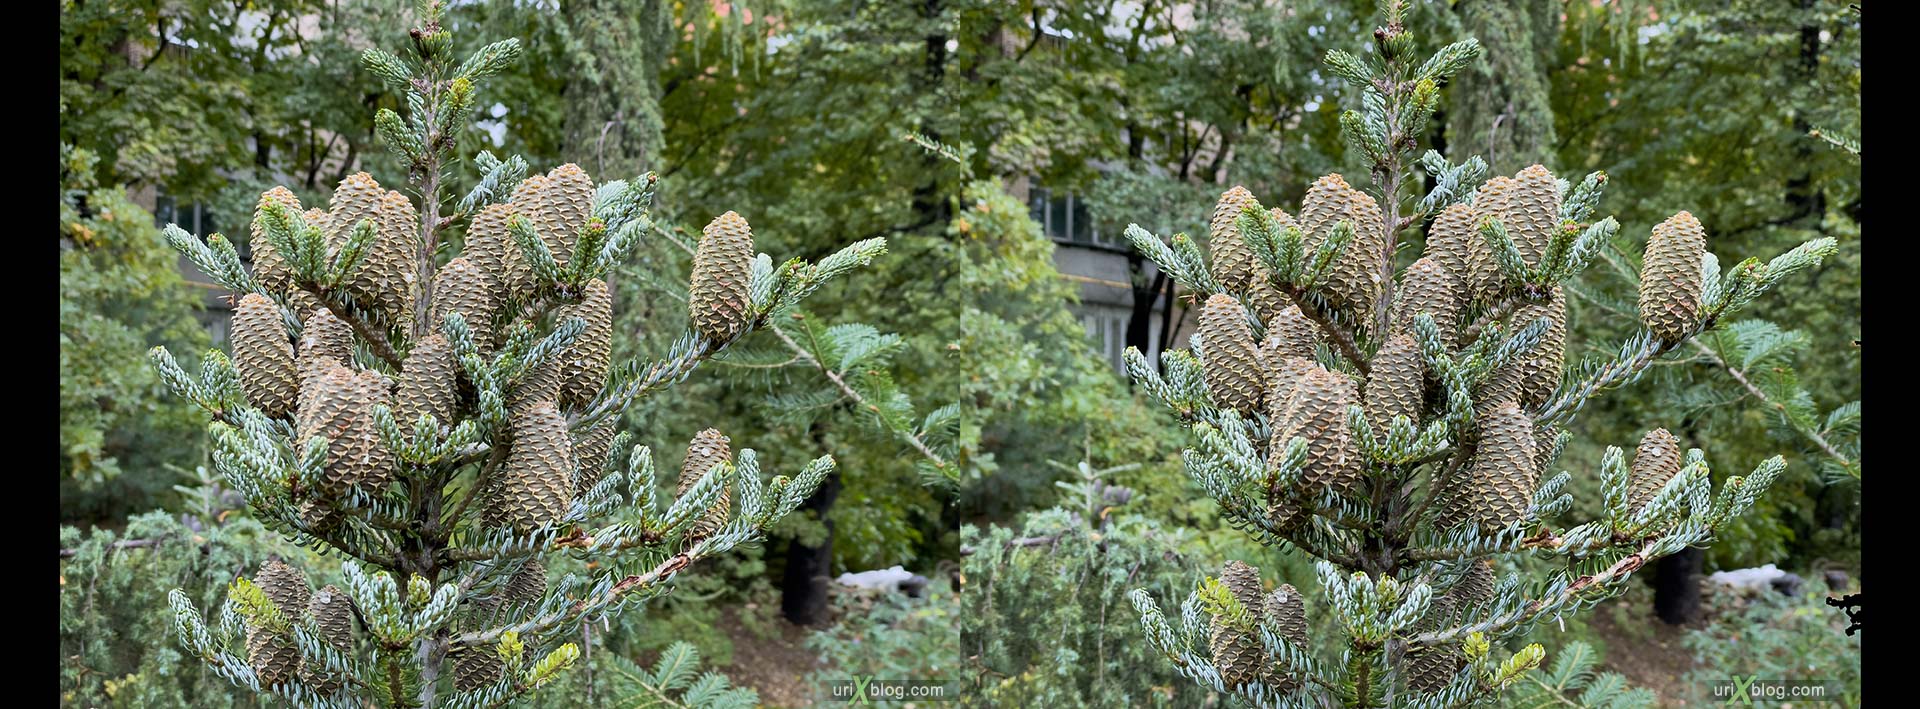 cones, tree, Pharmaceutical Garden, Russia, Moscow, 3D, stereo pair, cross-eyed, crossview, cross view stereo pair, stereoscopic